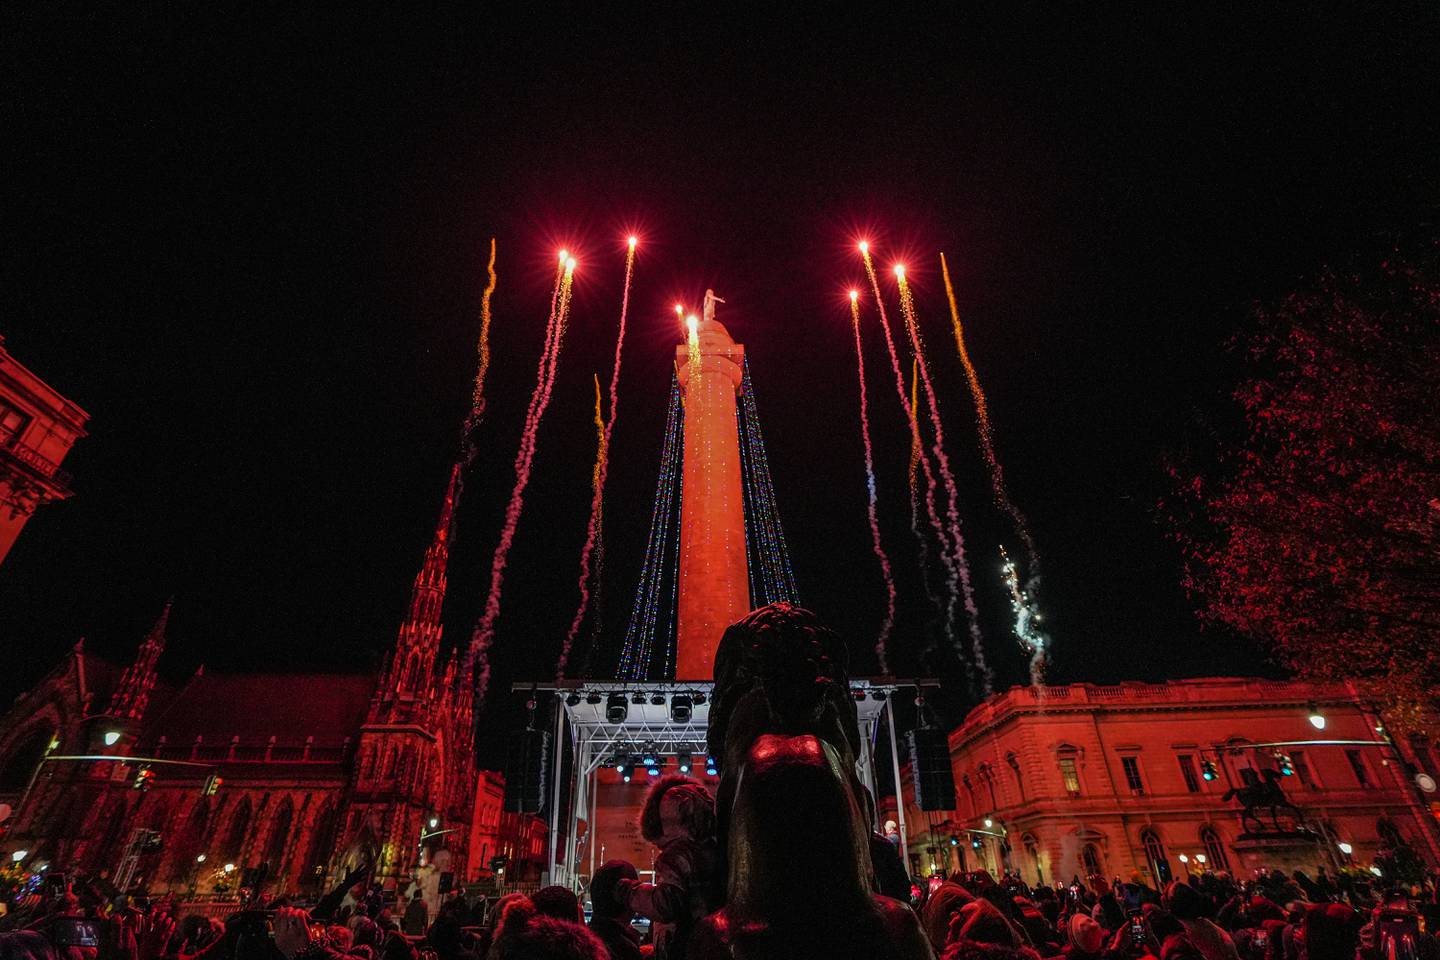 Hundreds of people gather to celebrate the 51st lighting of theMount Washington Monument in Baltimore City, Md., on December 1st, 2022.